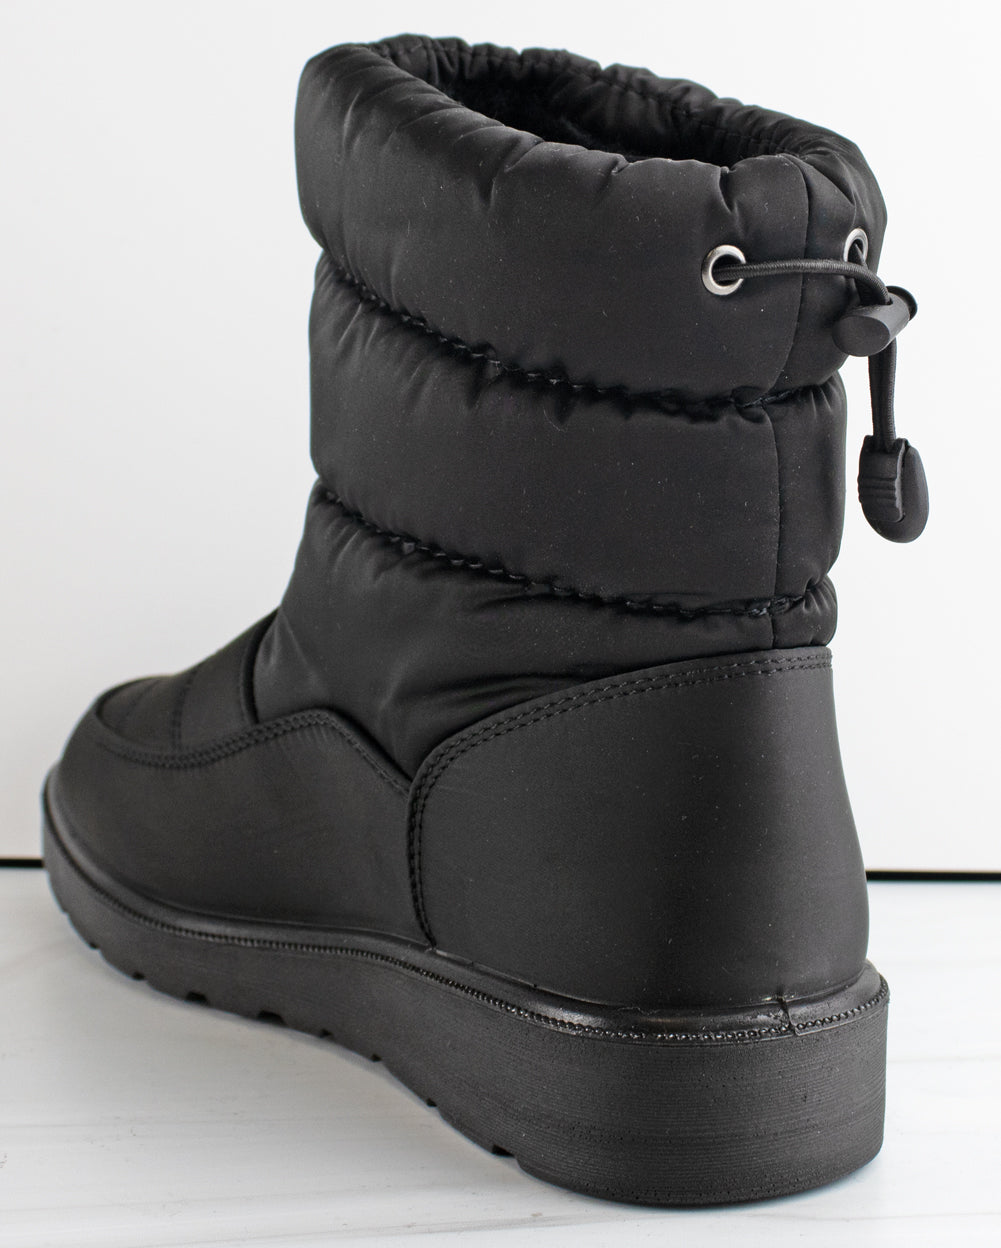 Coleen 1 Women&#39;s Insulated Fur Lined Rain/Snow Boots